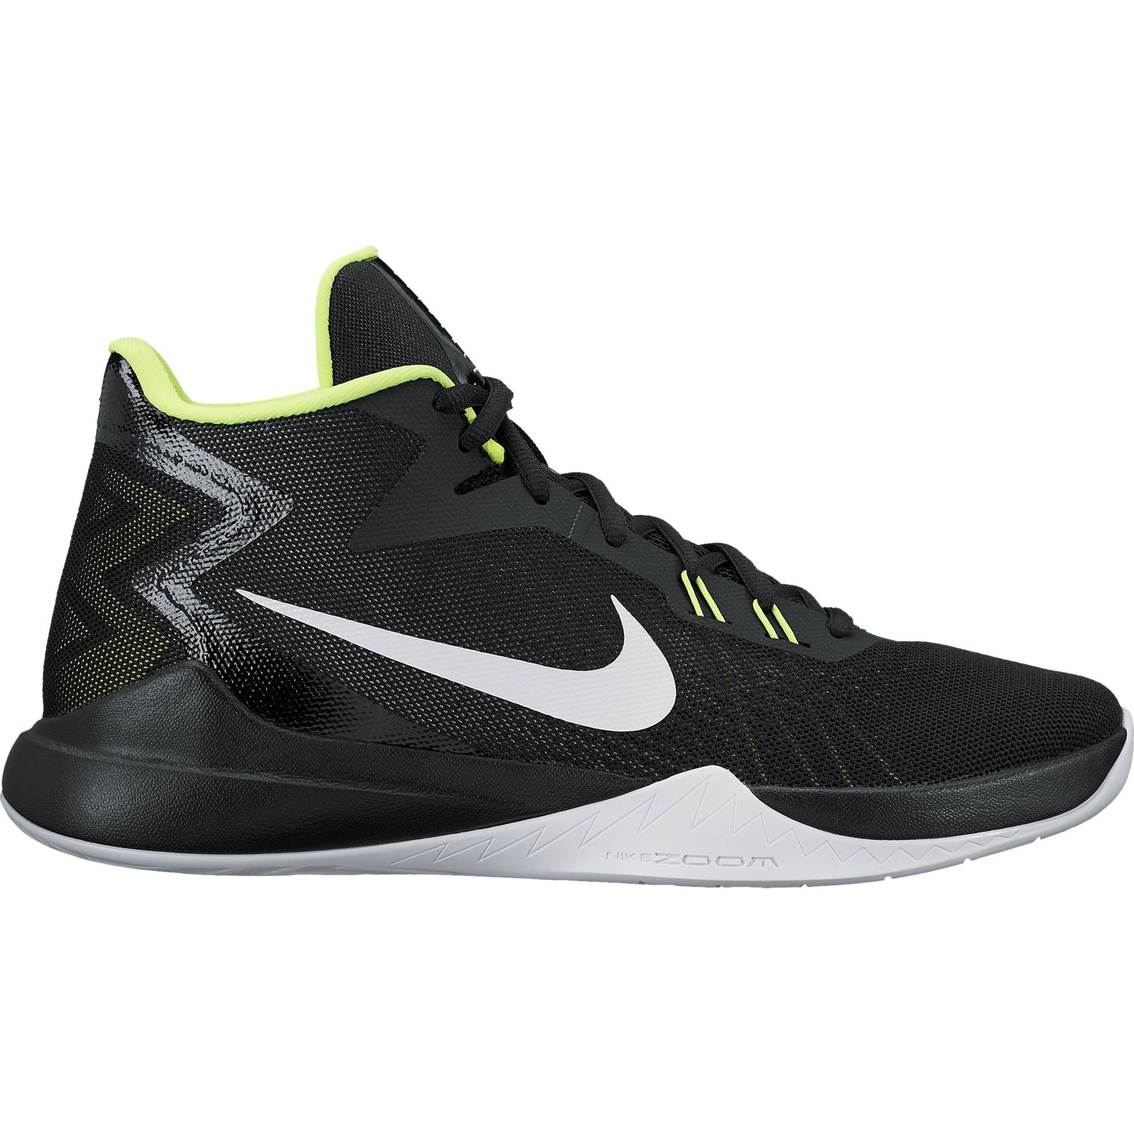 Nike Men's Zoom Evidence Basketball Shoes | Men's Athletic Shoes ...